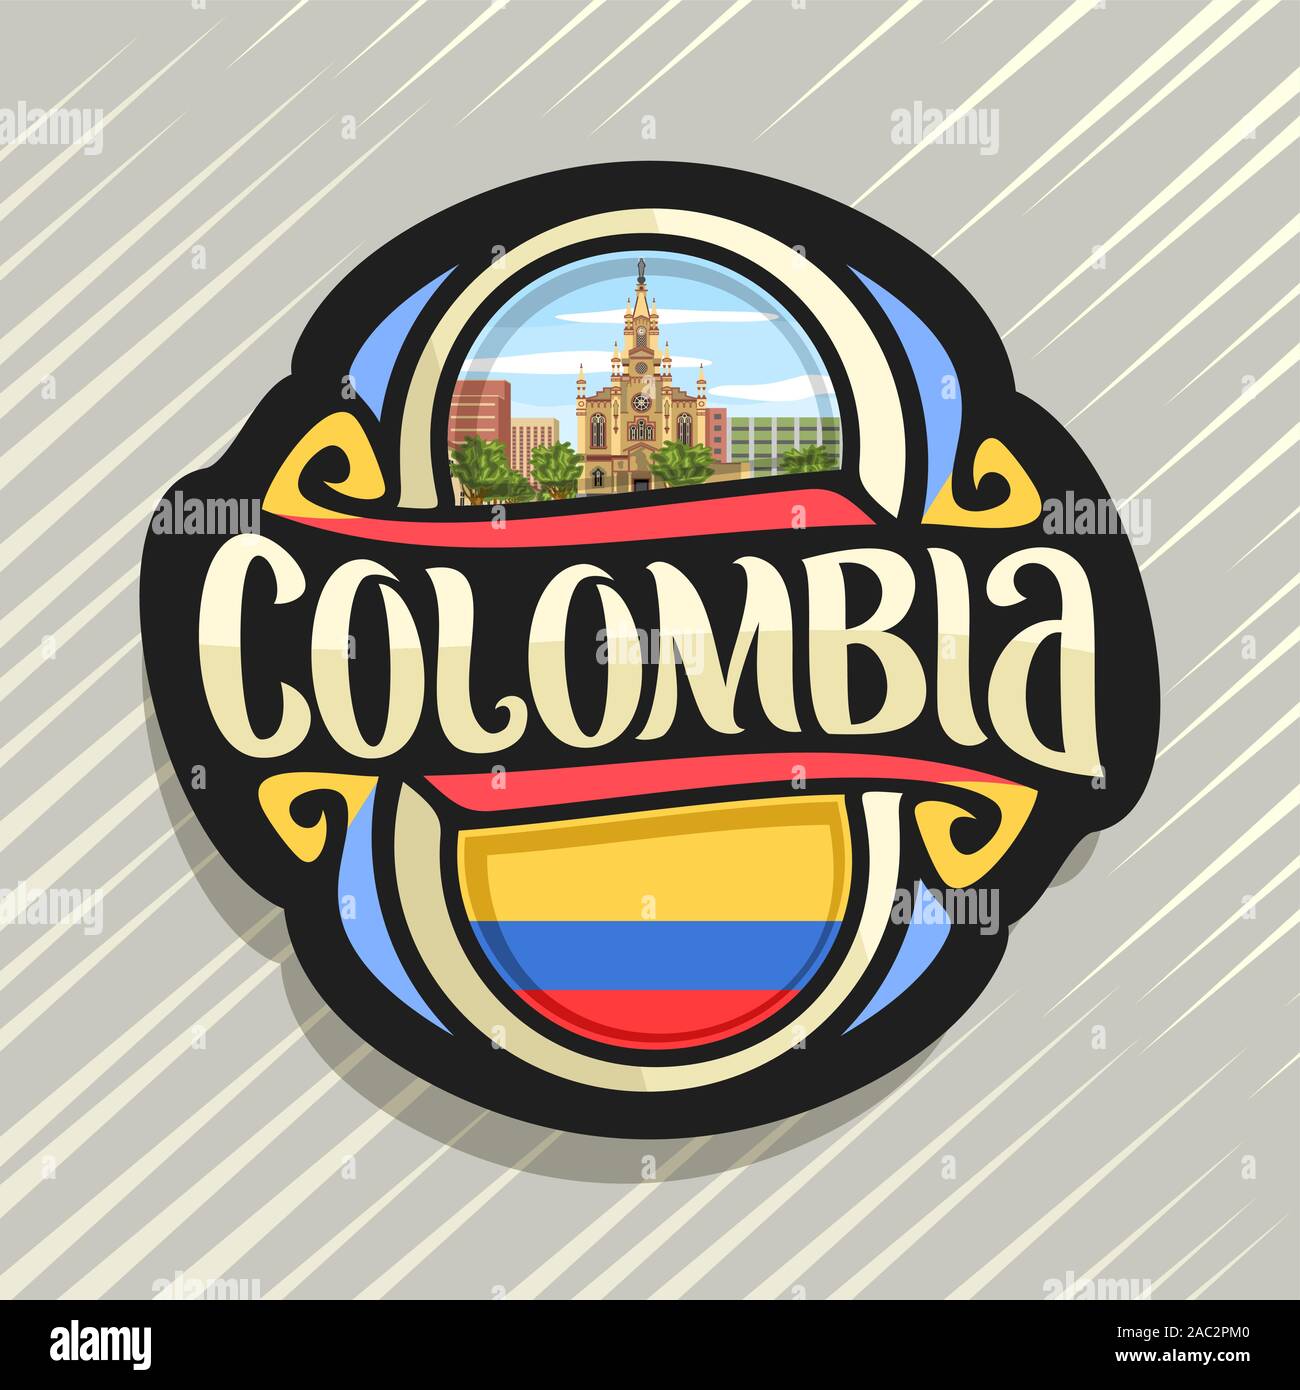 Vector logo for Colombia country, fridge magnet with colombian flag, original brush typeface for word colombia, national colombian symbol - Jesus Naza Stock Vector